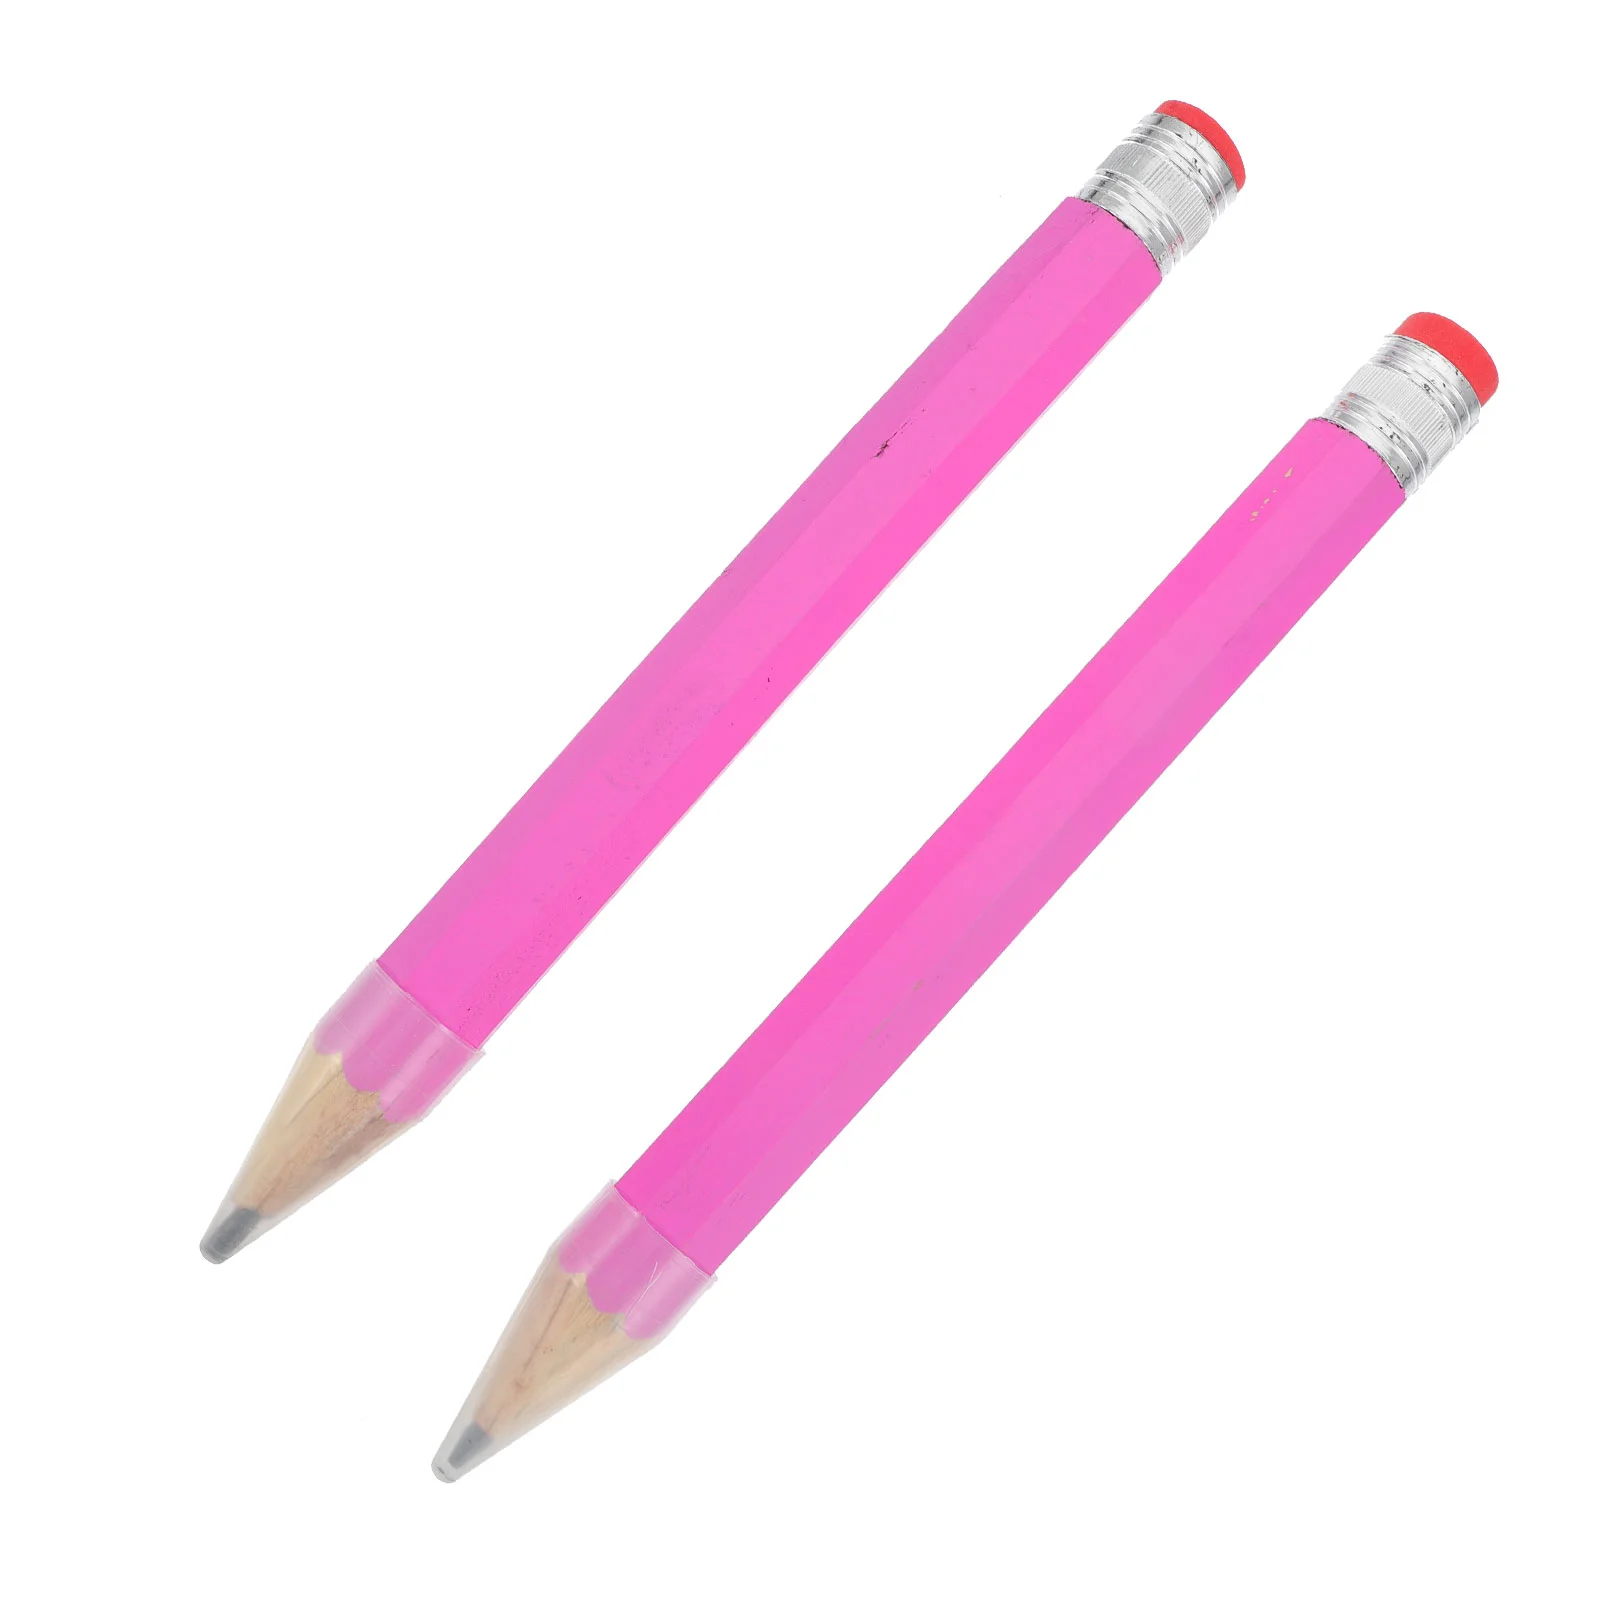 

2pcs 35cm Wooden Large Drawing Writing Painting Mark Stationery Props (Random Pink Color System)